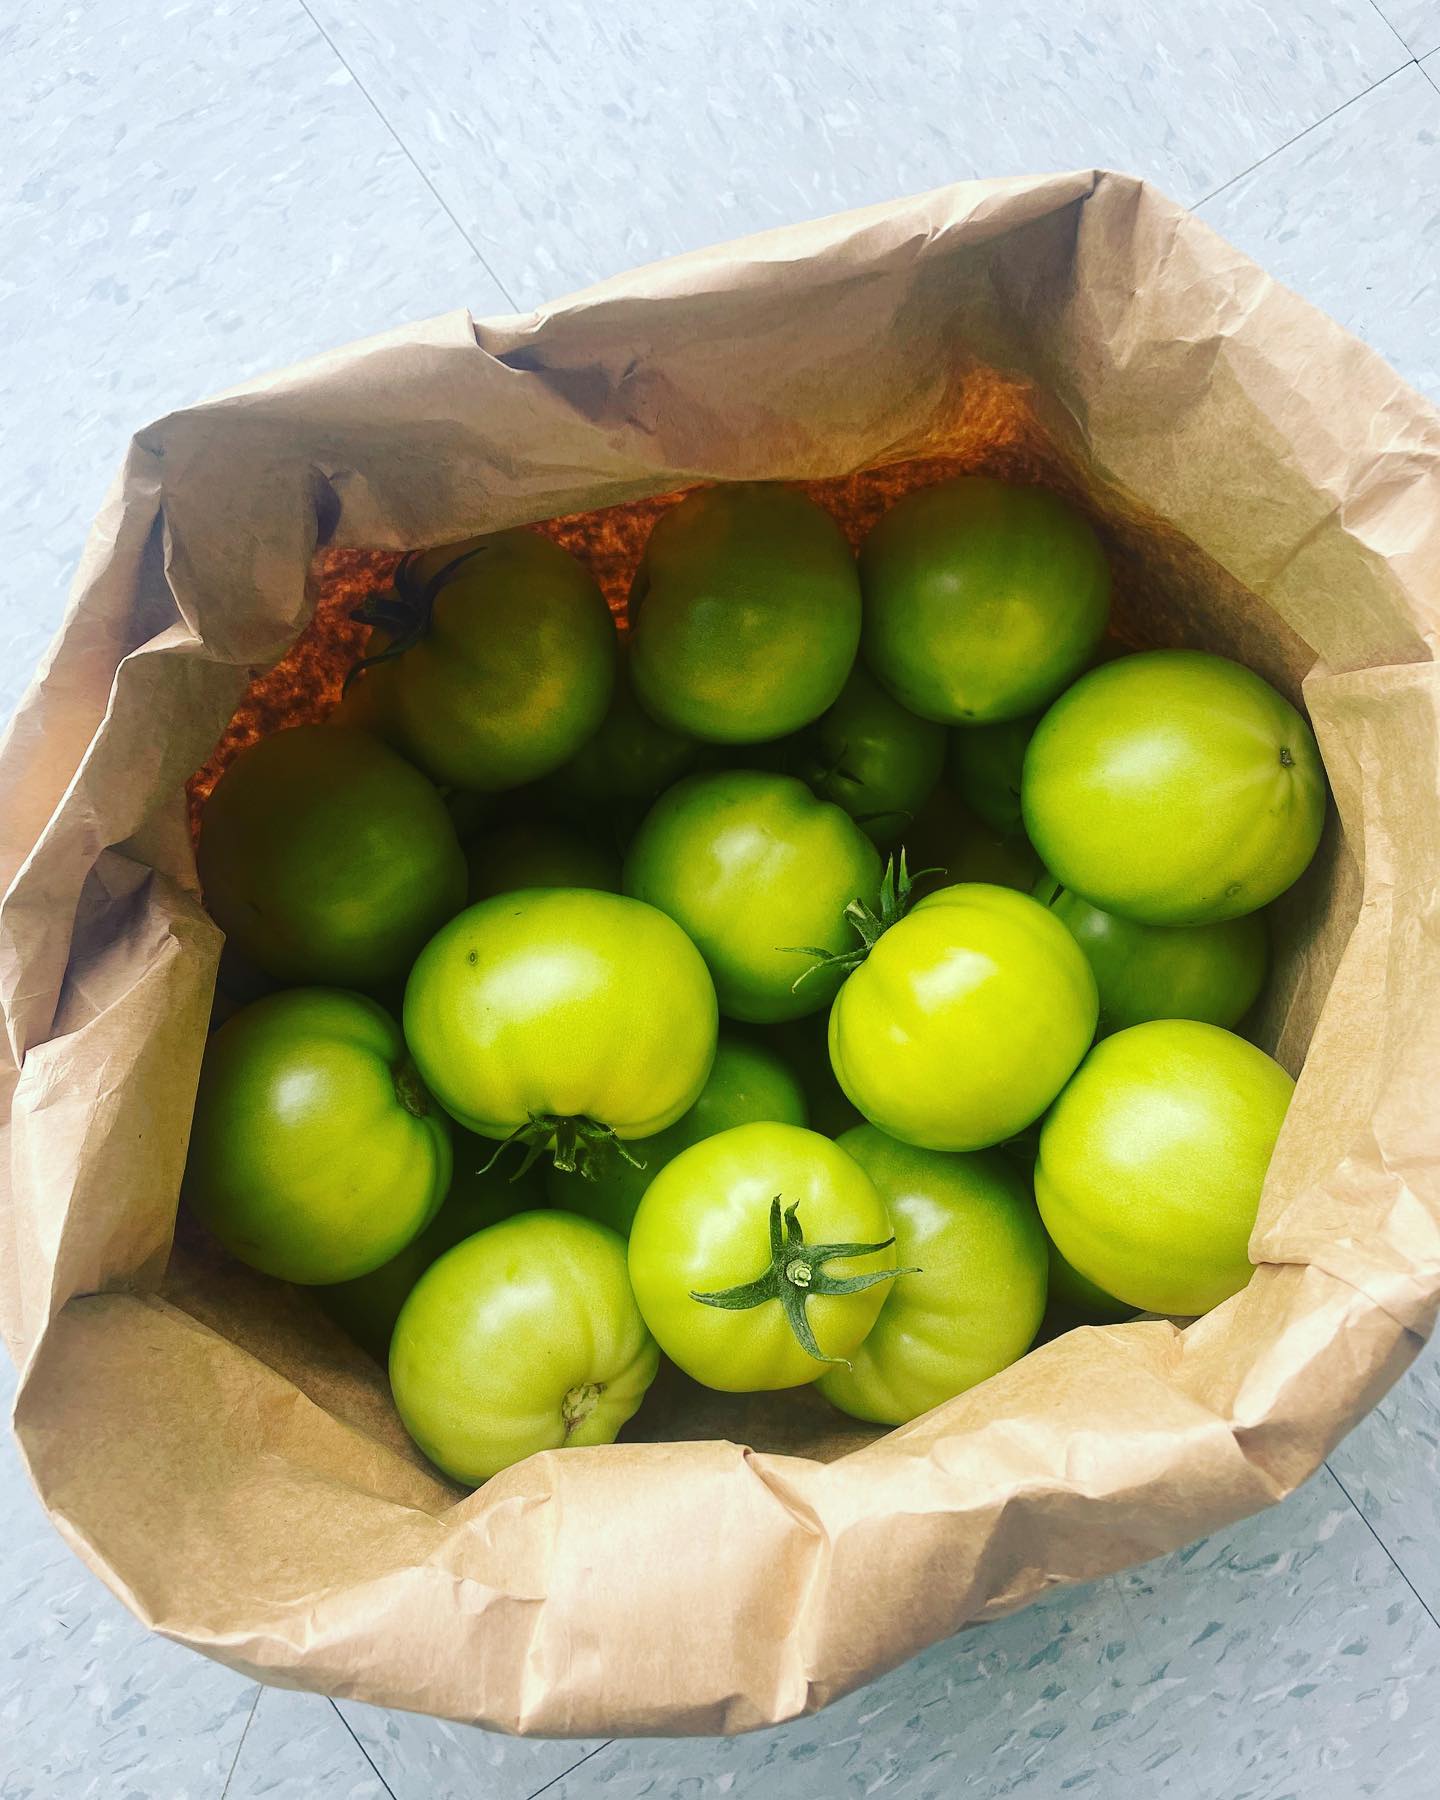 A special from Brady Farm is available for you, here at Brady Market. 

Green tomatoes are $2 a pound!

We also have other great produce available from Brady Farm, like collards, kale, spinach, and cucumbers! 

We’ll see you soon!